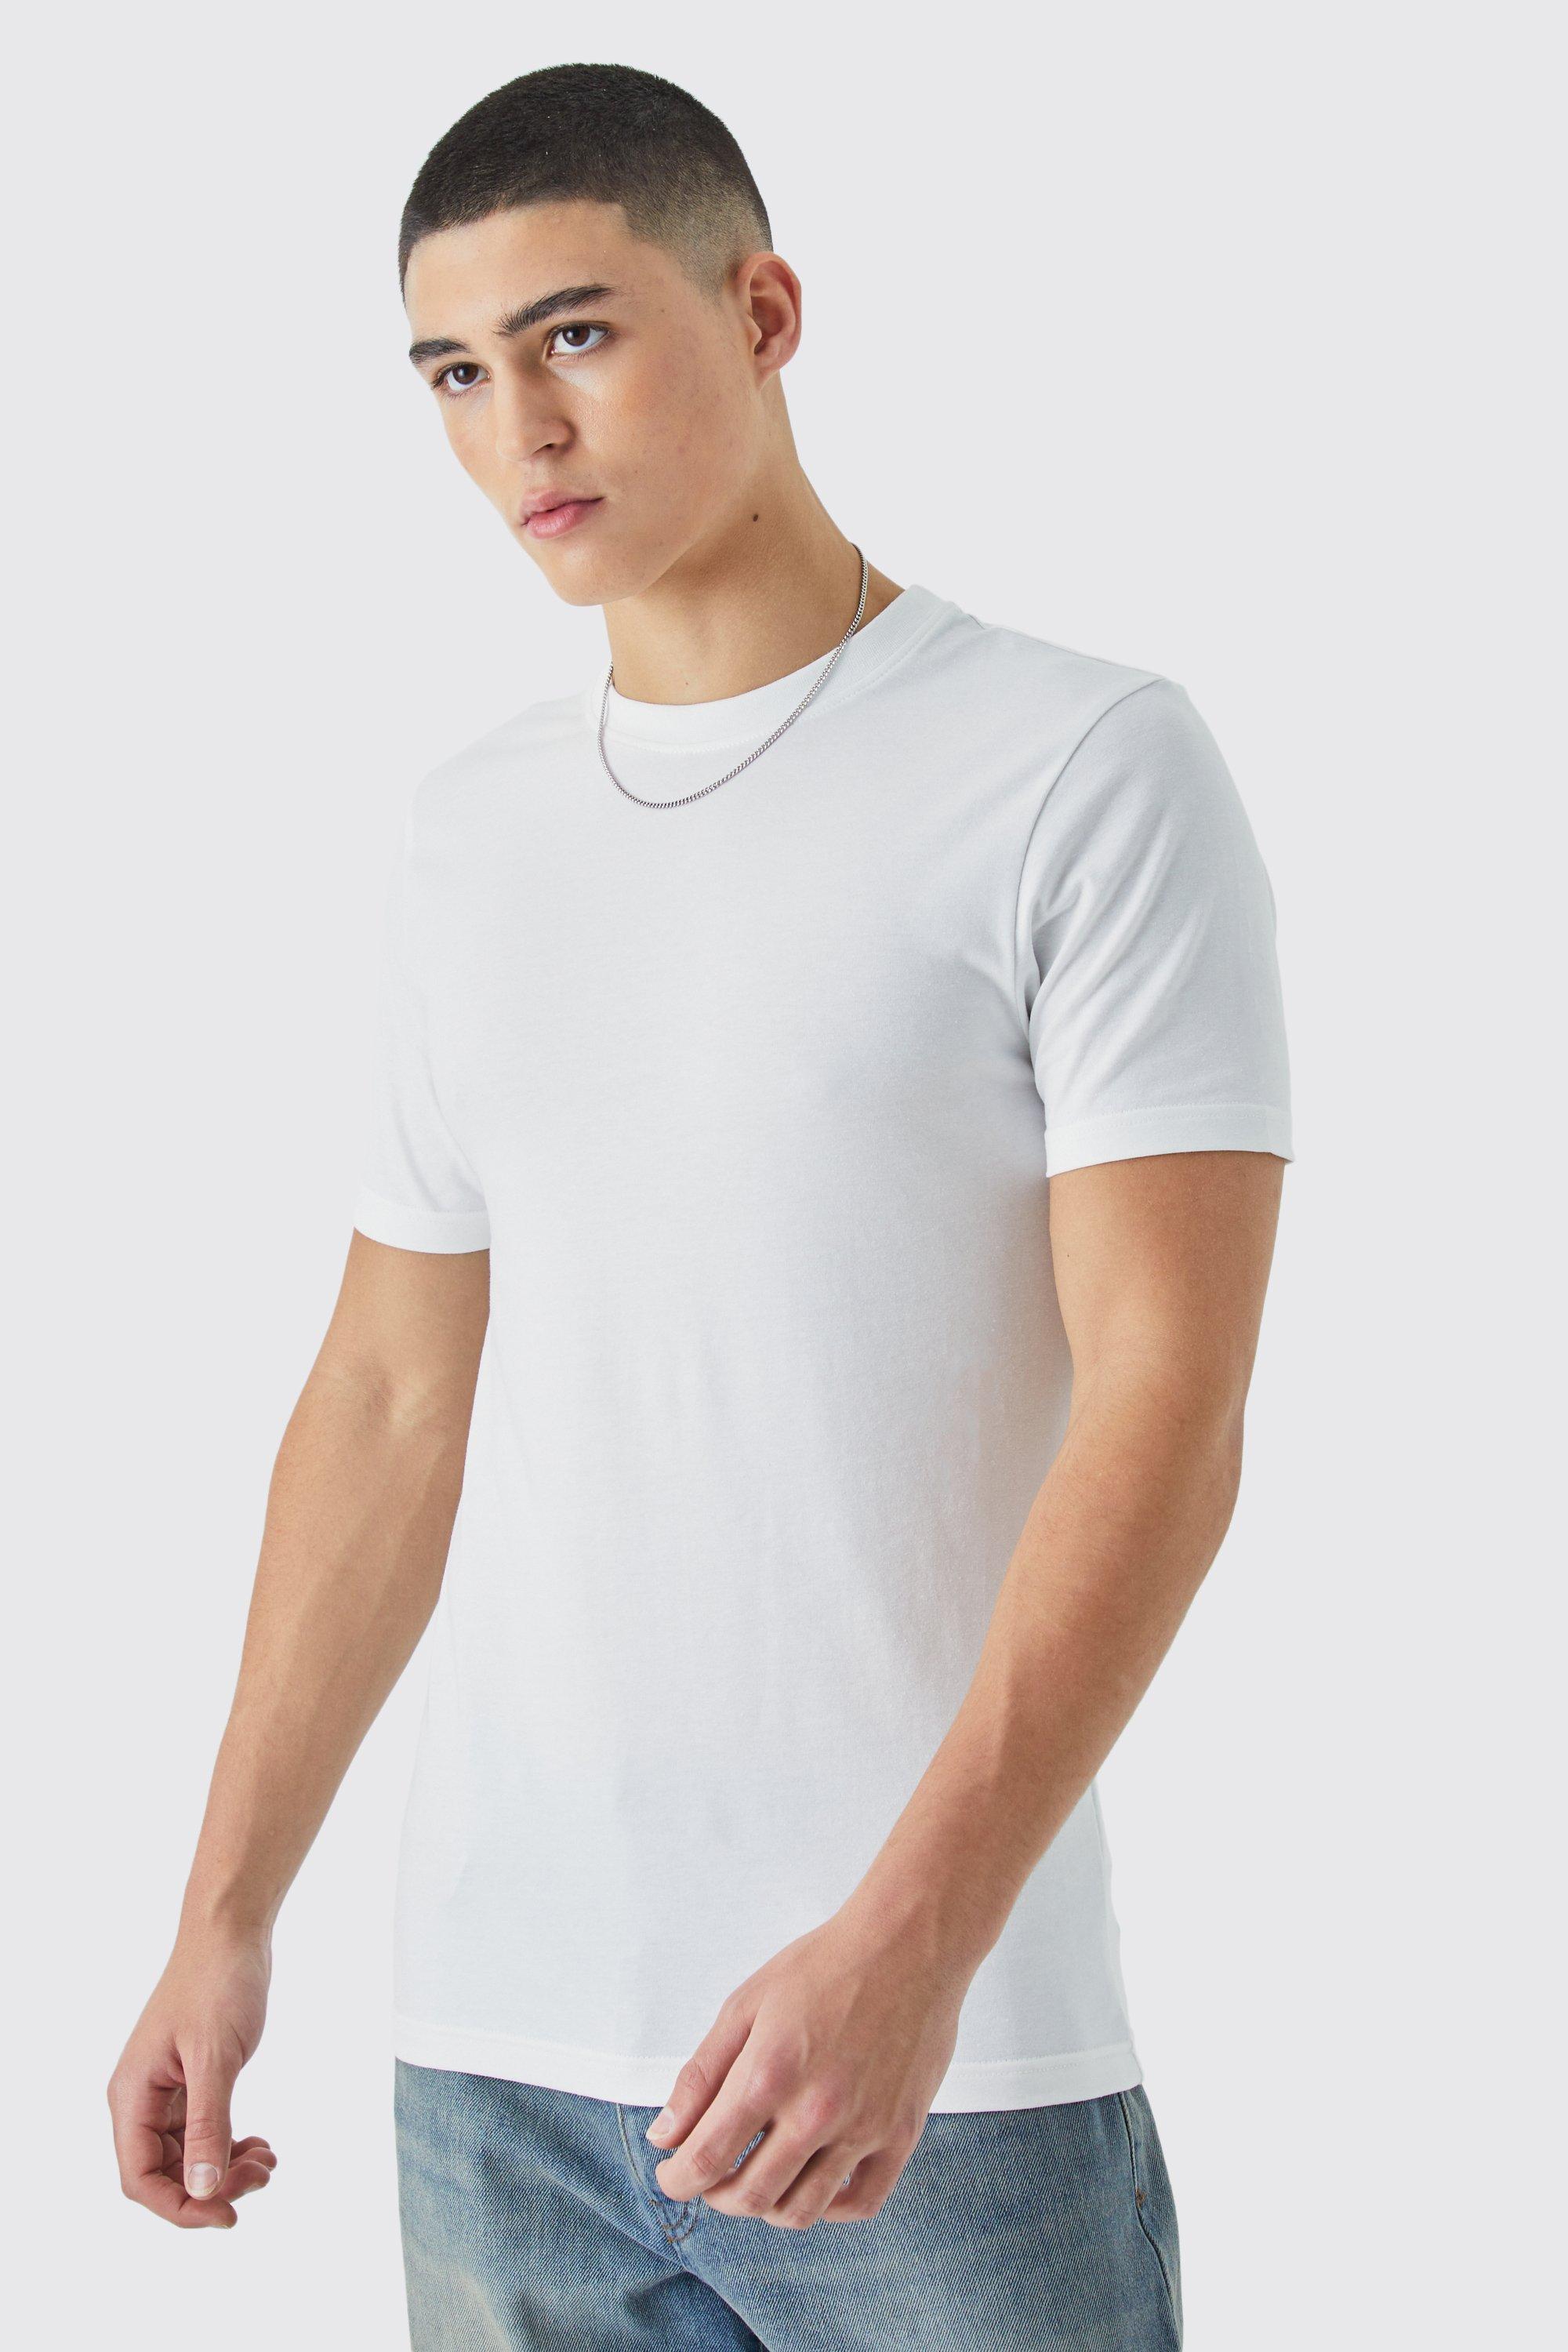 Mens White Basic Muscle Fit T-shirt, White